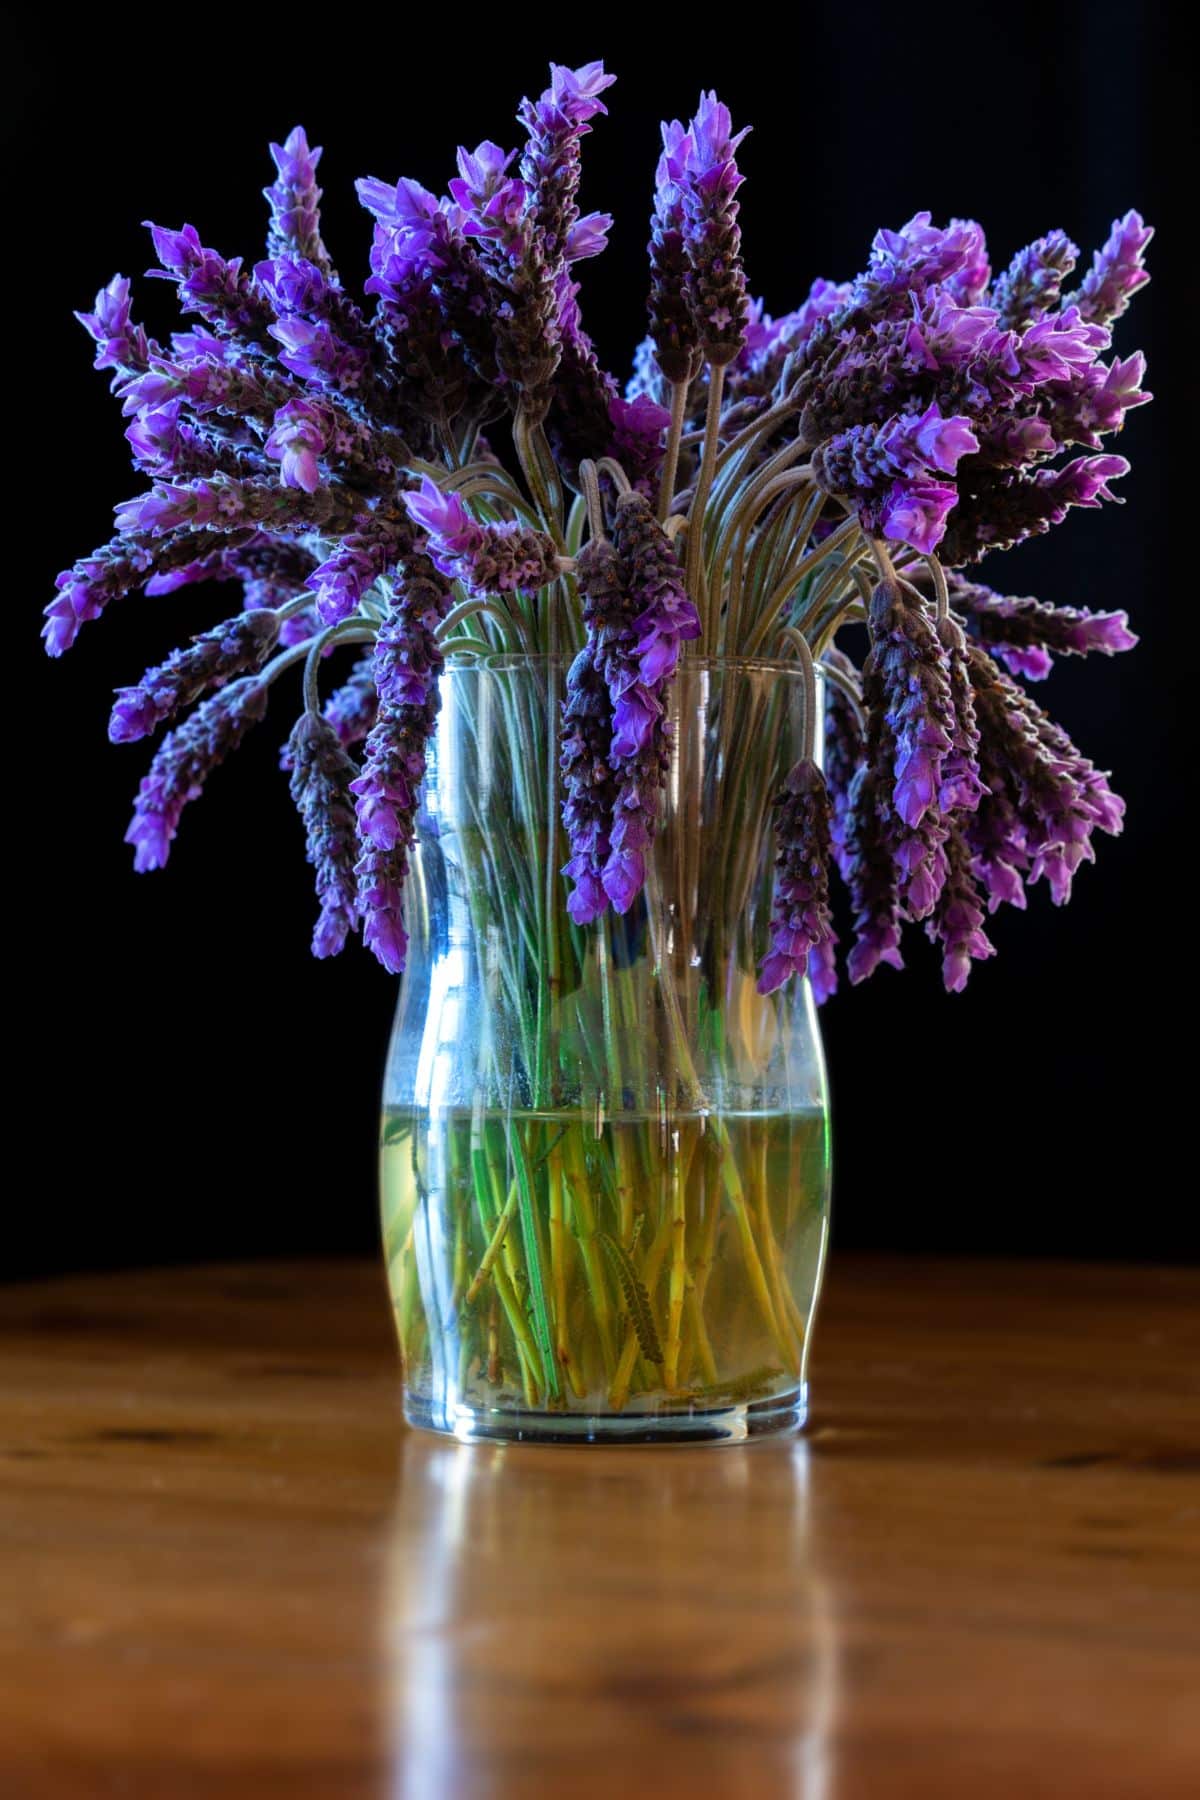 Lavender cuttings in a glass container with water.